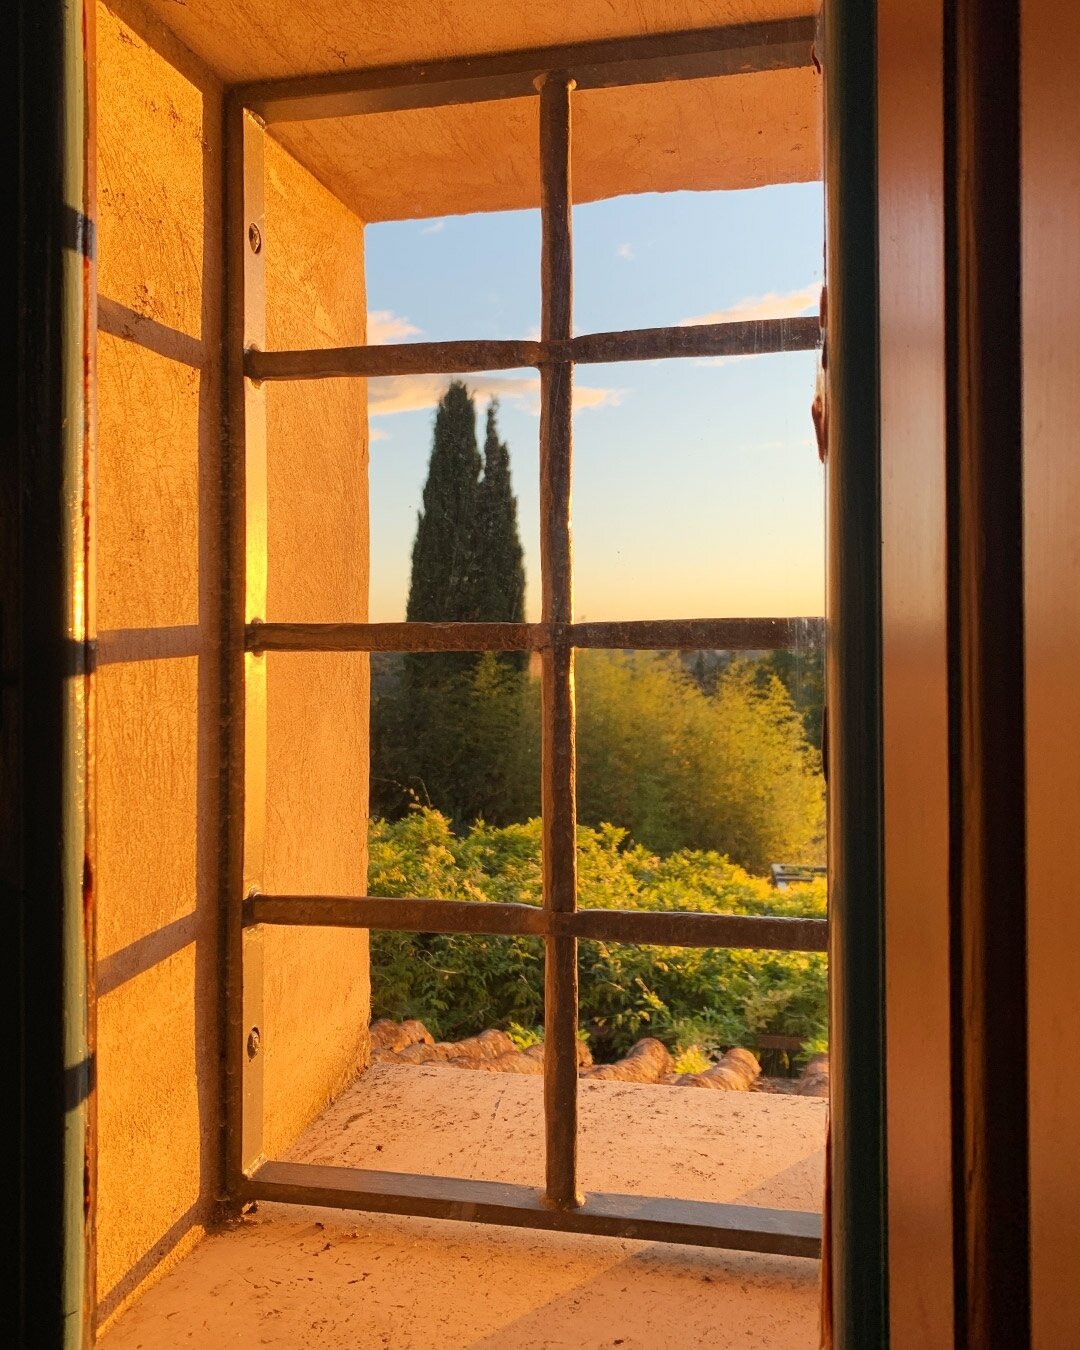 Golden hour⁠.⁠
Shadows of trees on the torre.⁠
⁠
Photo by @paulspriggsactor⁠
⁠
⁠
⁠#italytravel⁠
⁠#tuscany⁠
⁠#florence⁠
#torredisopra⁠
#goldenhour⁠
#aperitivo⁠